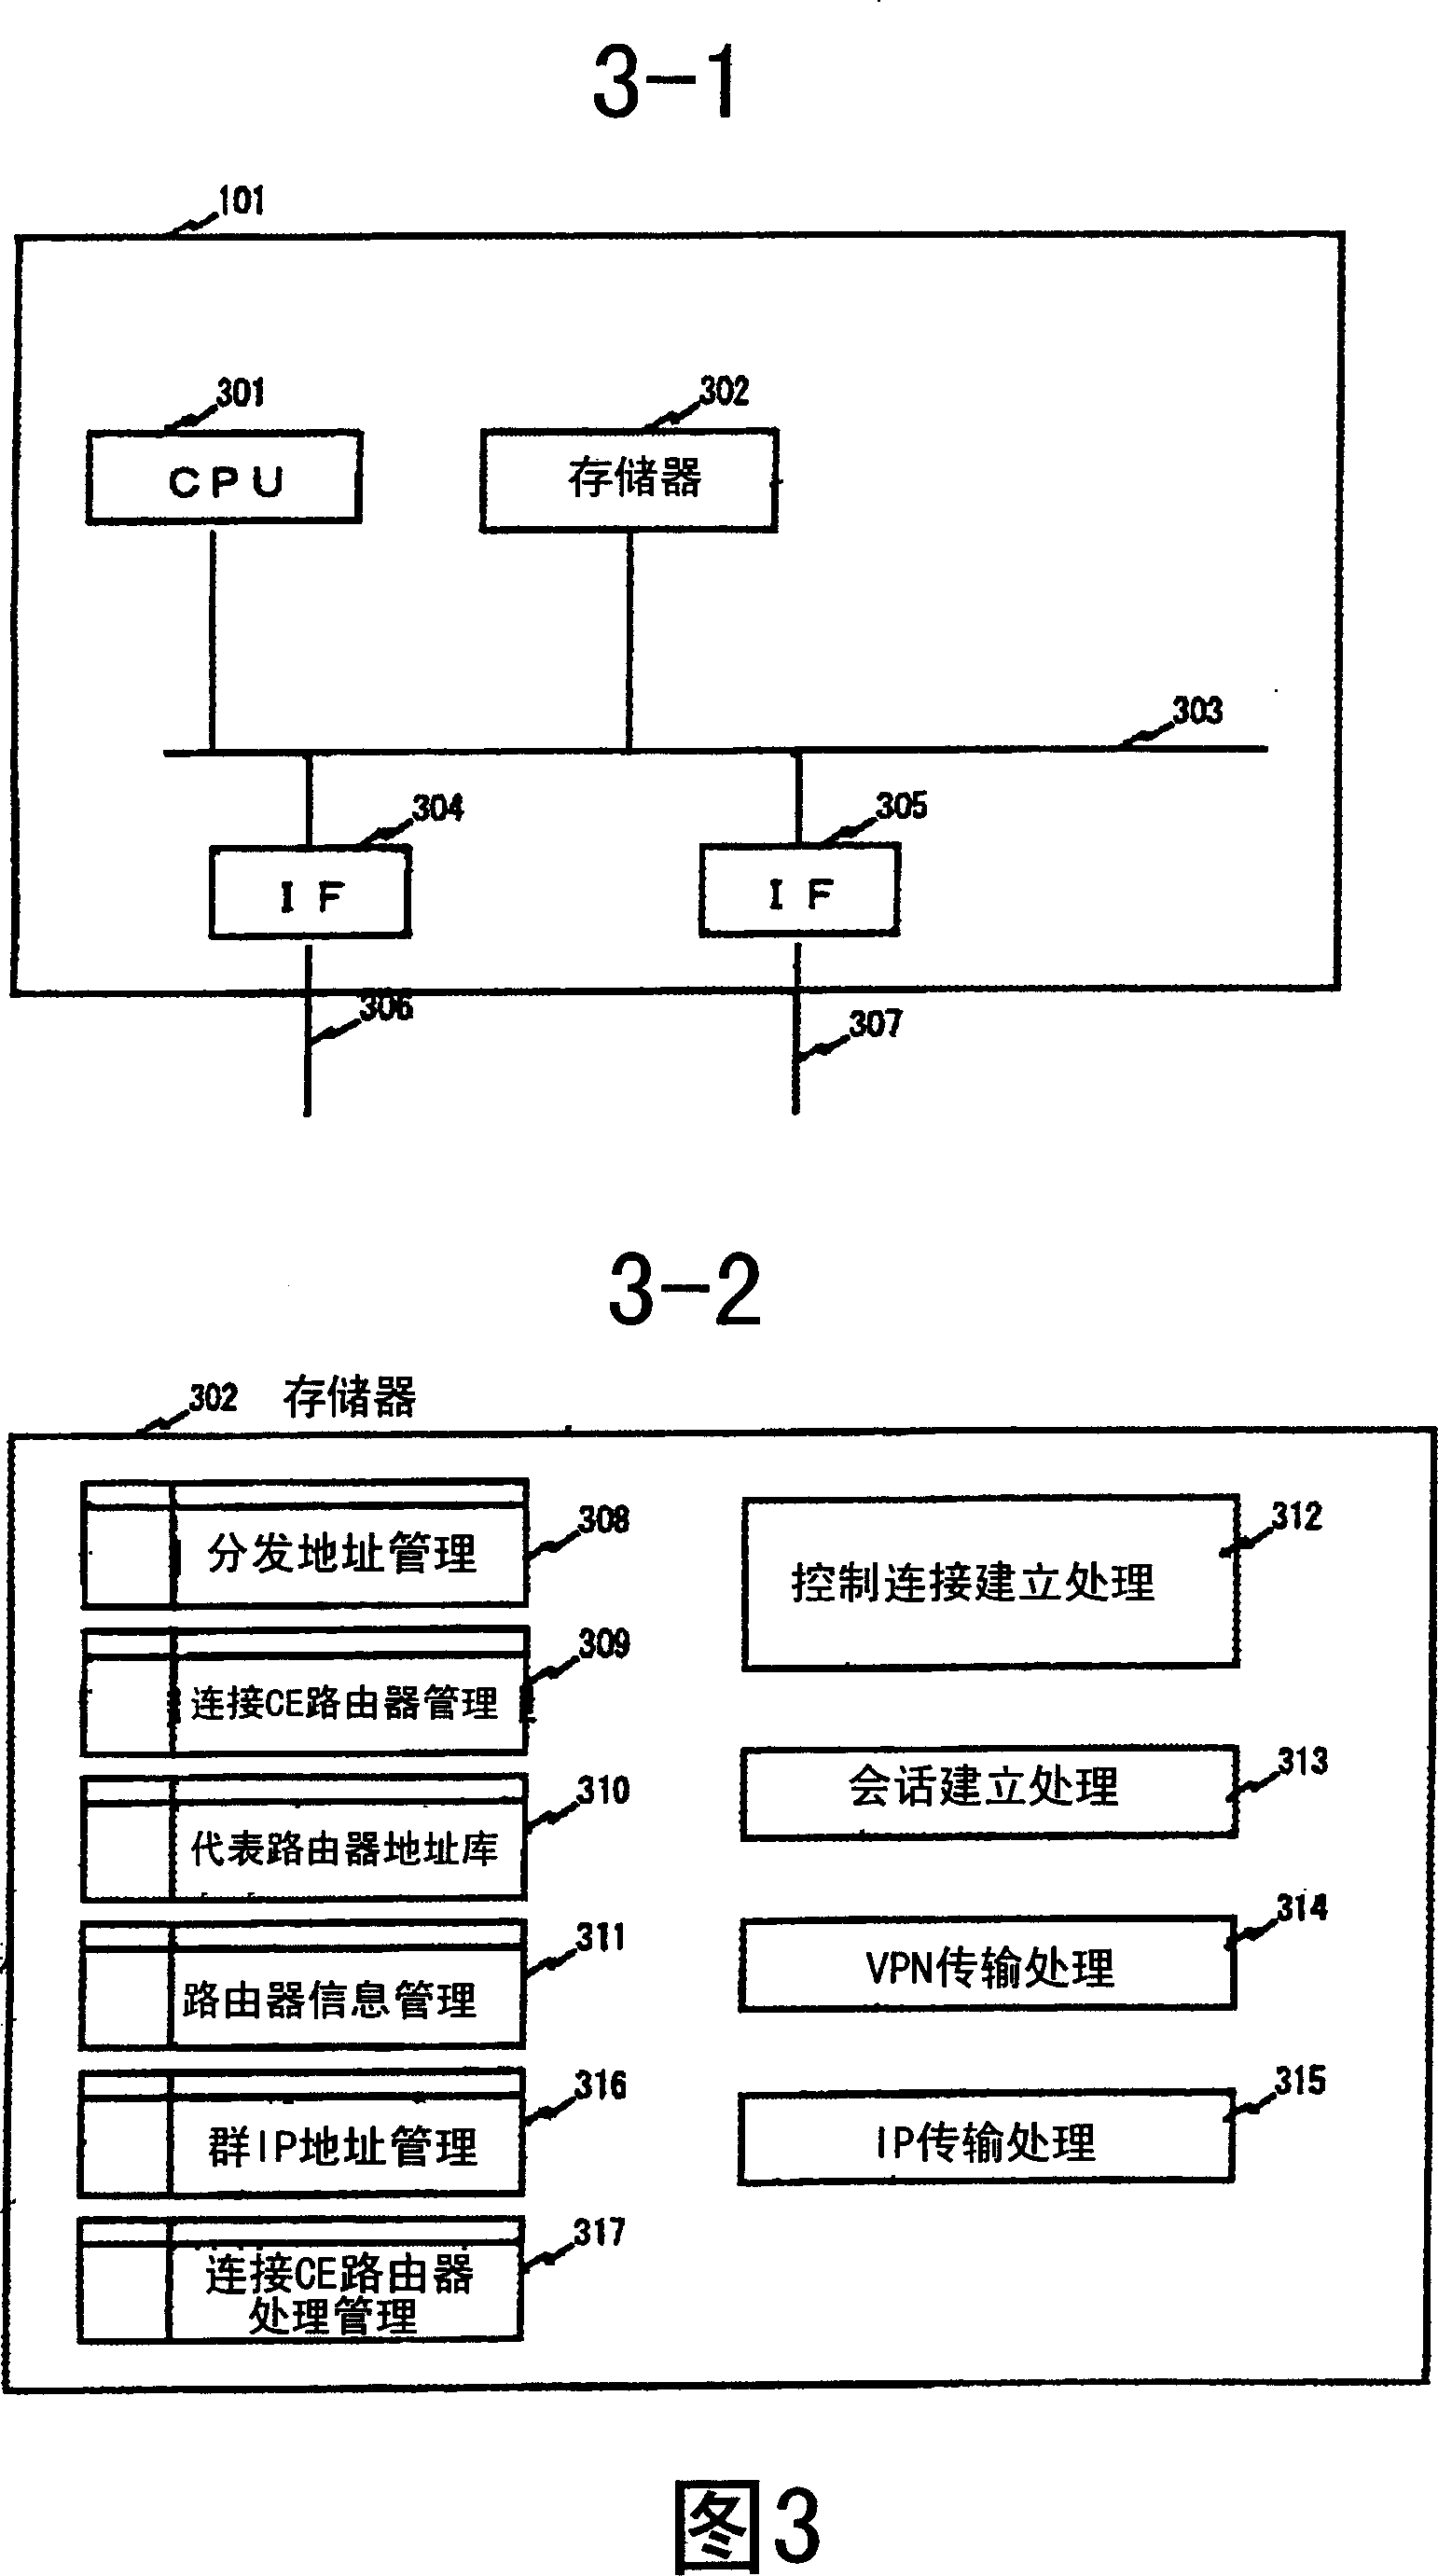 Router and communication system